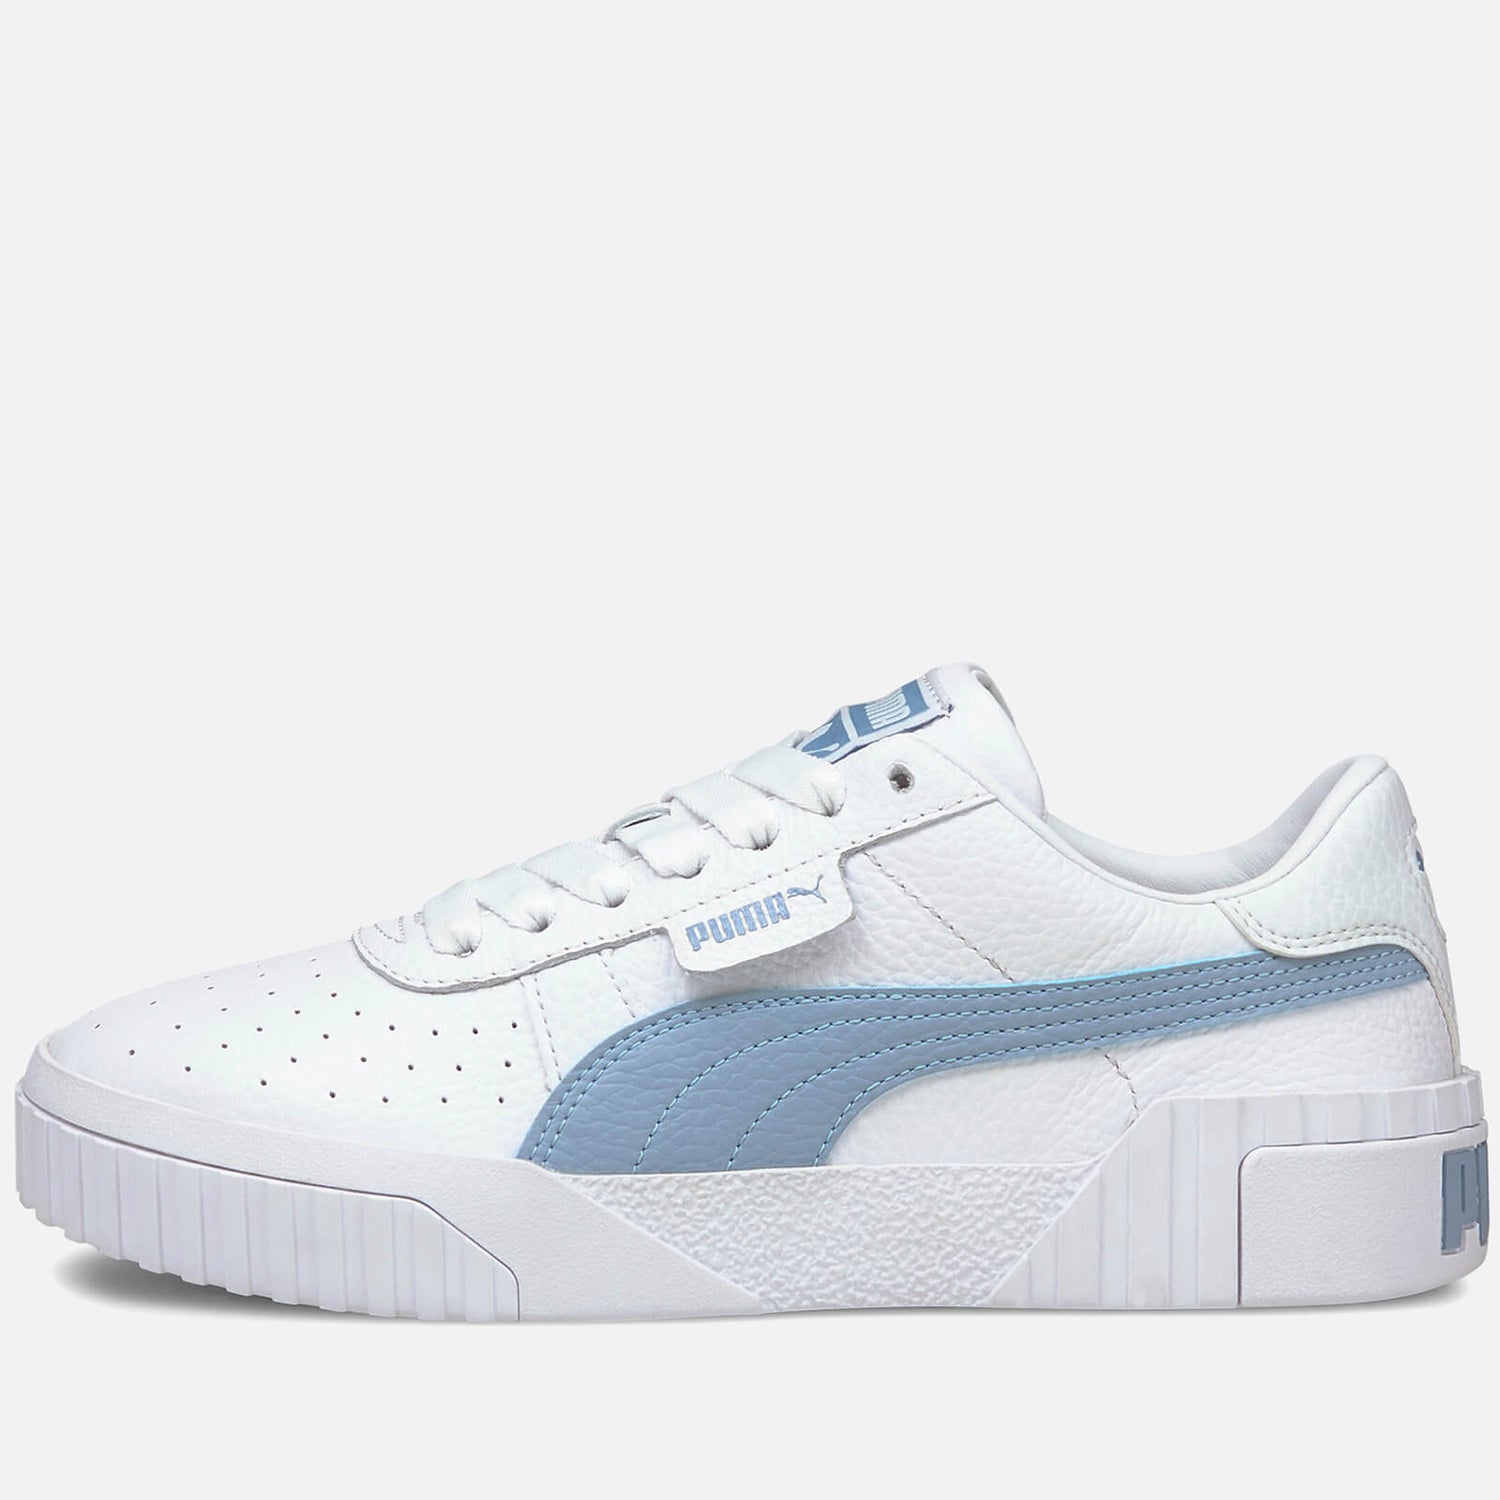 Puma Women's Cali Perforated Leather Trainers - Puma White/Forever Blue